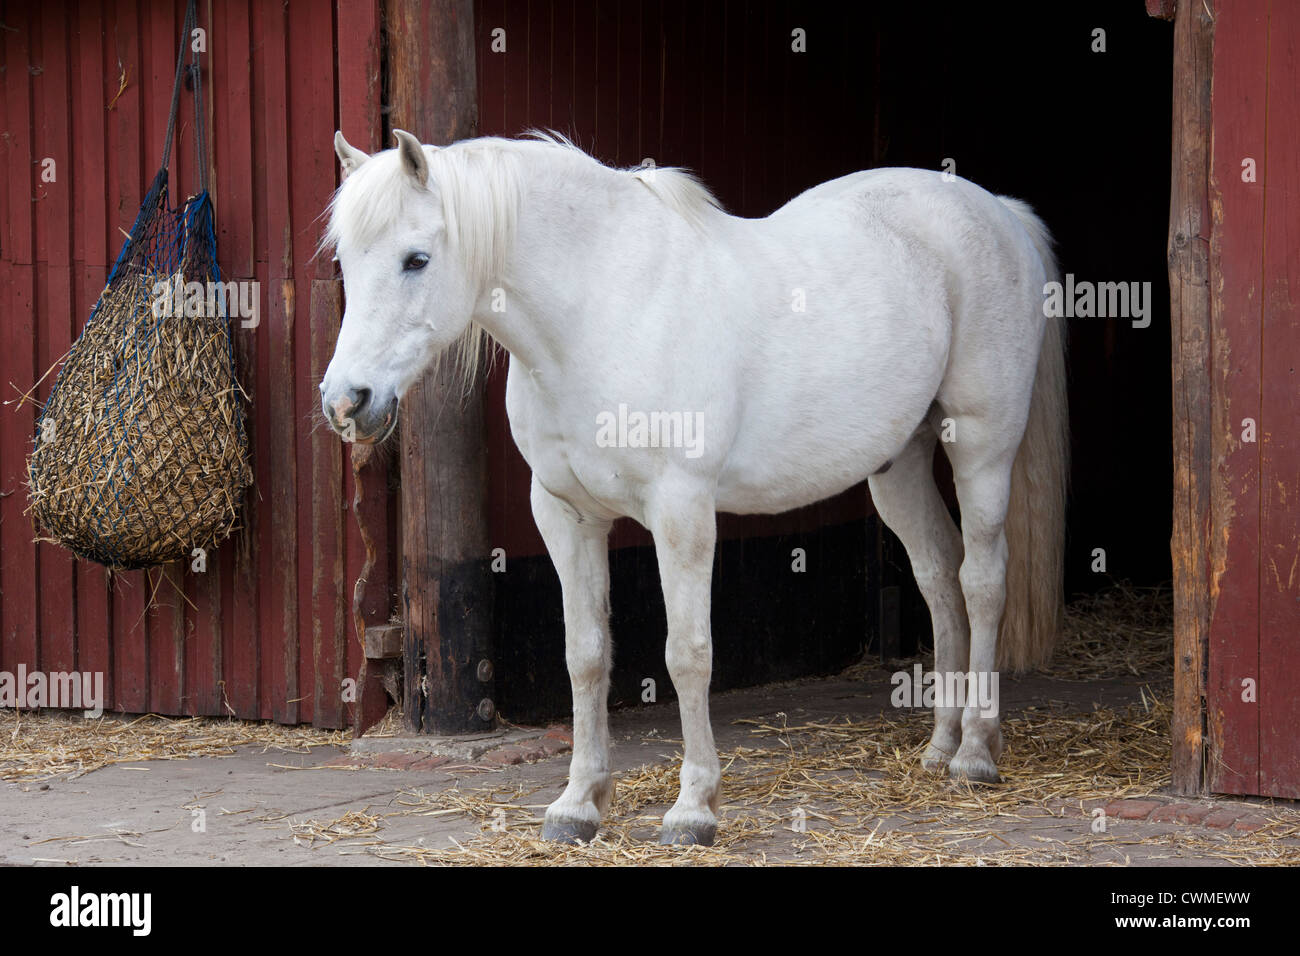 White horse (Equus caballus) stallion and hay bag hanging from stable, Germany Stock Photo